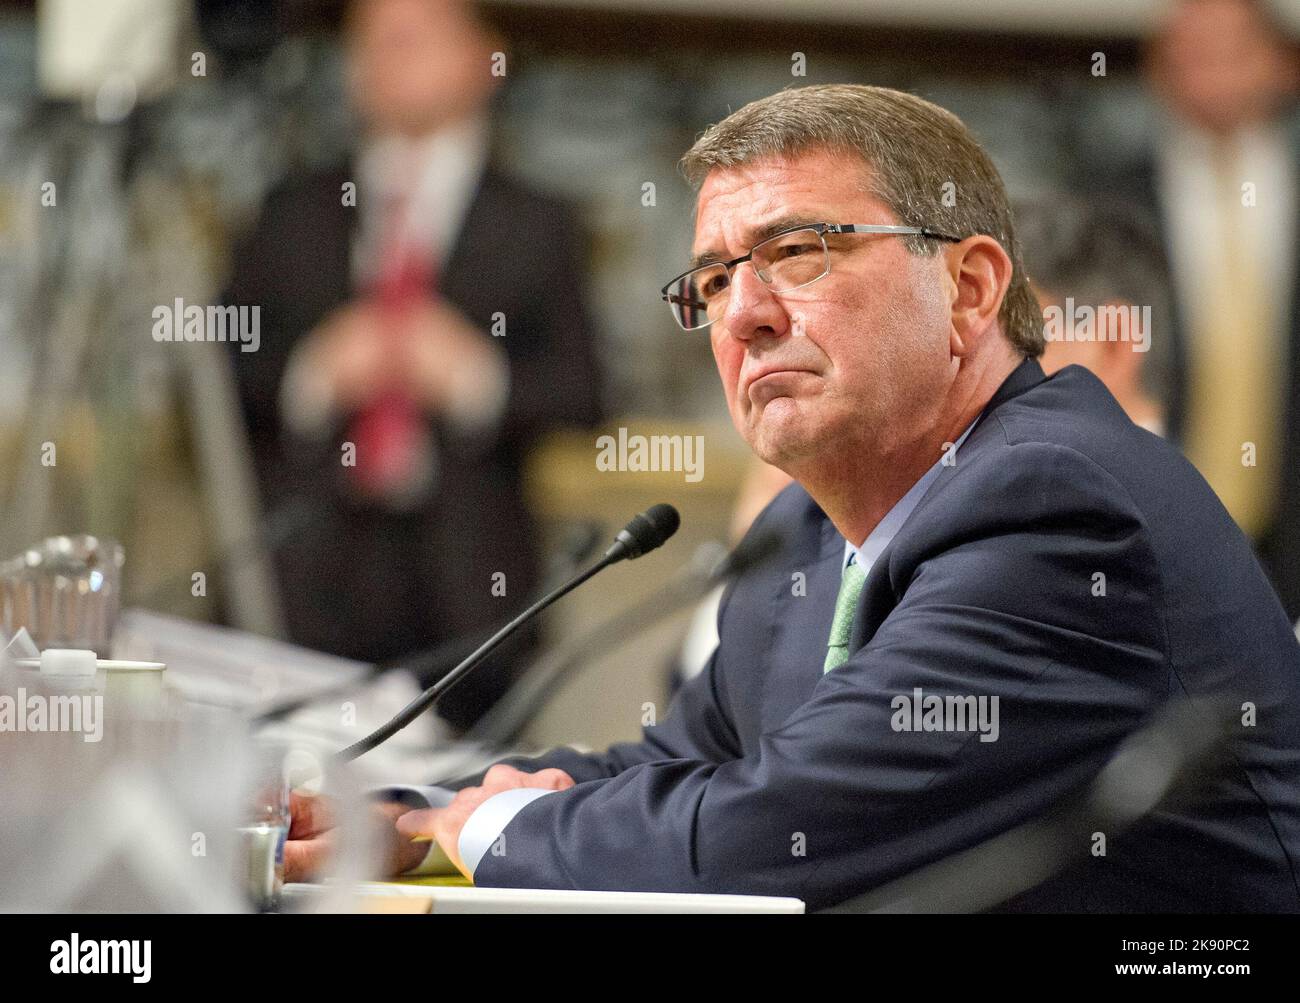 United States Secretary of Defense Ashton Carter gives testimony before the US Senate Committee on Armed Services concerning 'Impacts of the Joint Comprehensive Plan of Action (JCPOA) on U.S. Interests and the Military Balance in the Middle East' on Capitol Hill on Wednesday, July 29, 2015.Credit: Ron Sachs/CNP /MediaPunch Stock Photo